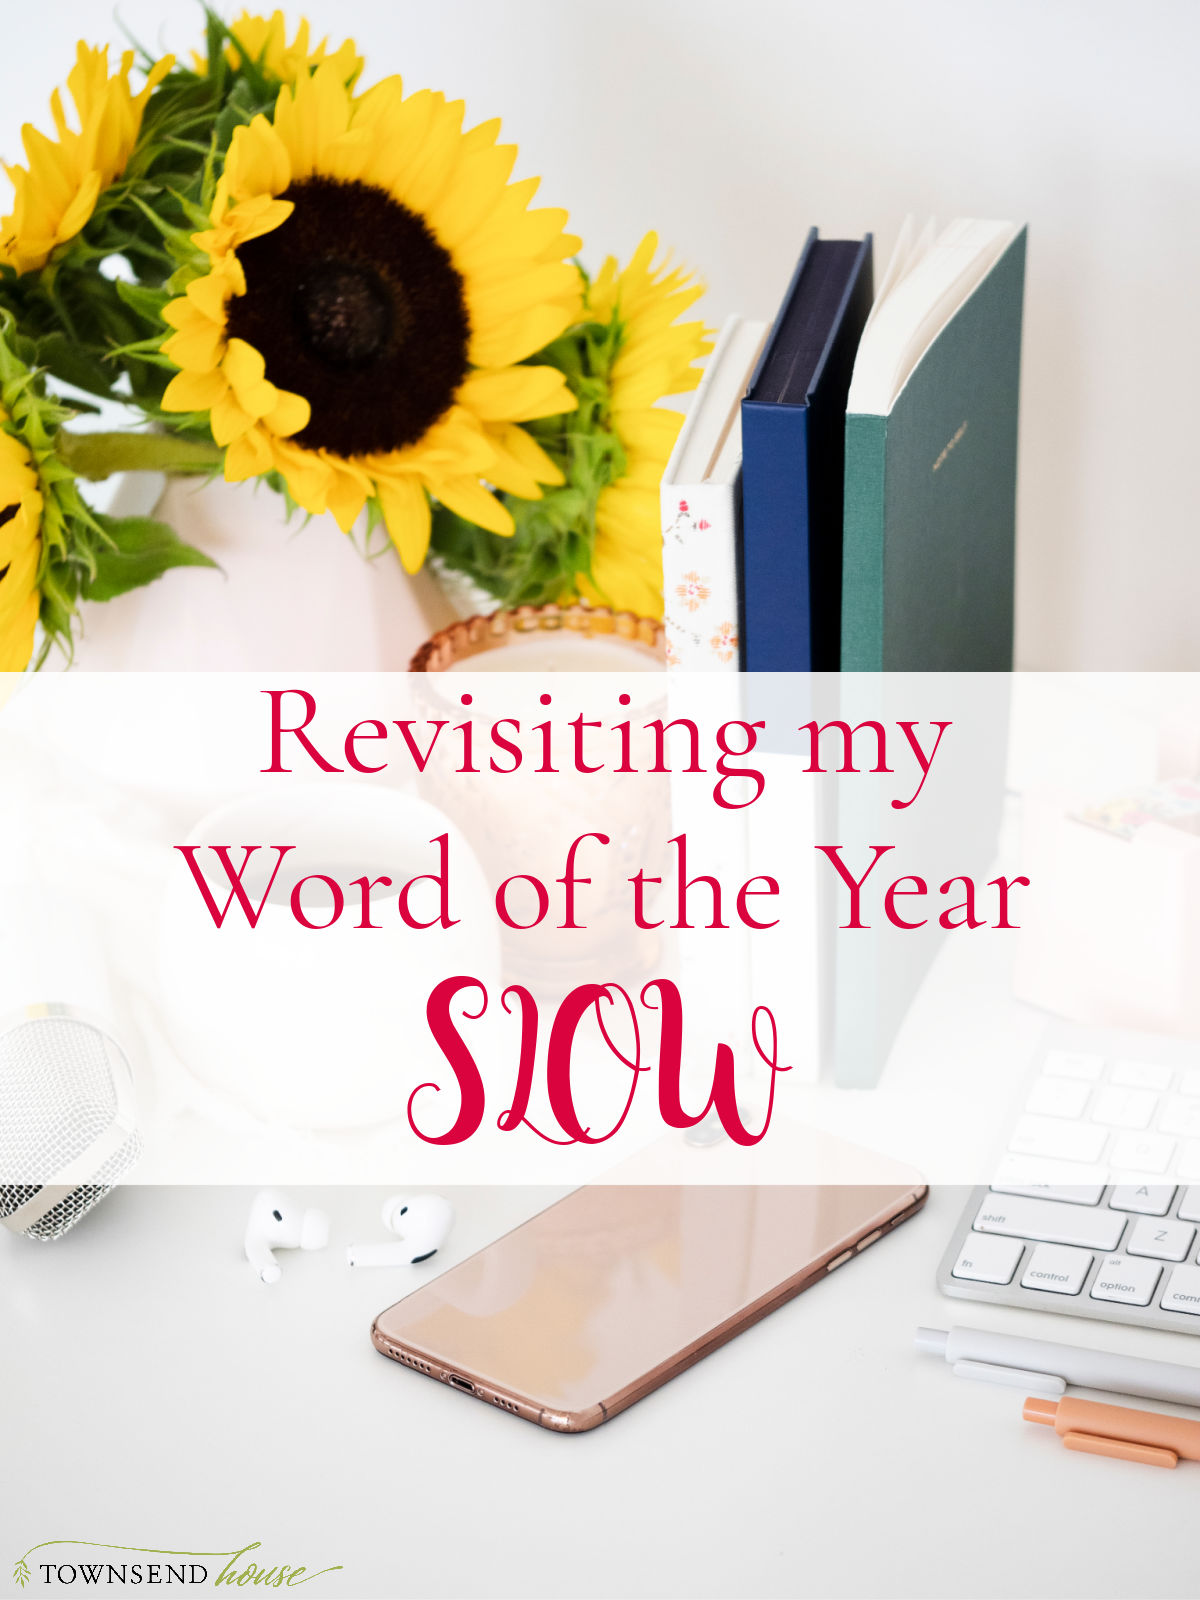 Revisiting Slow: My Word of the Year